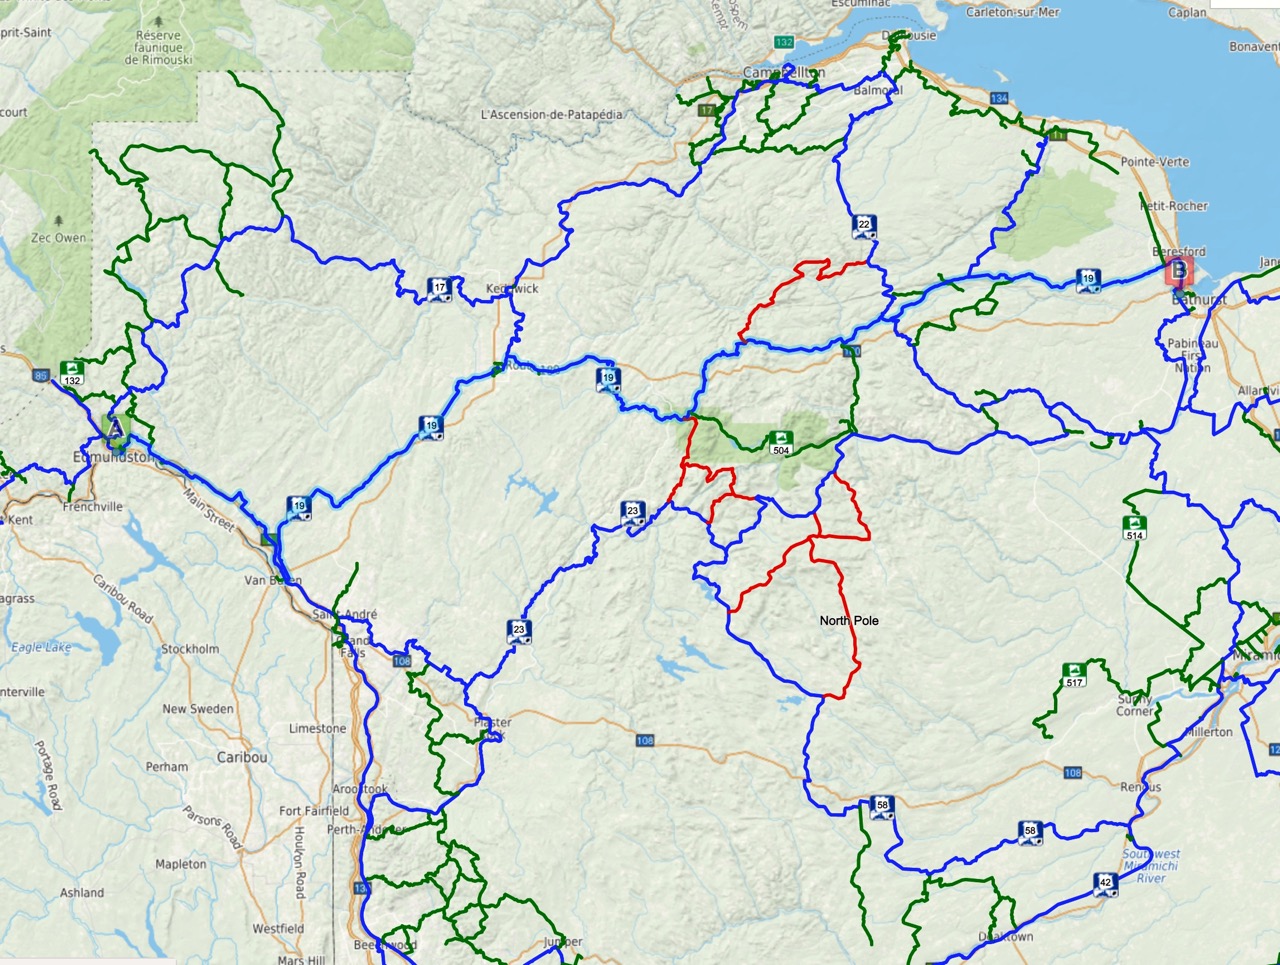 Christmas Mountains trails marked in red on map.